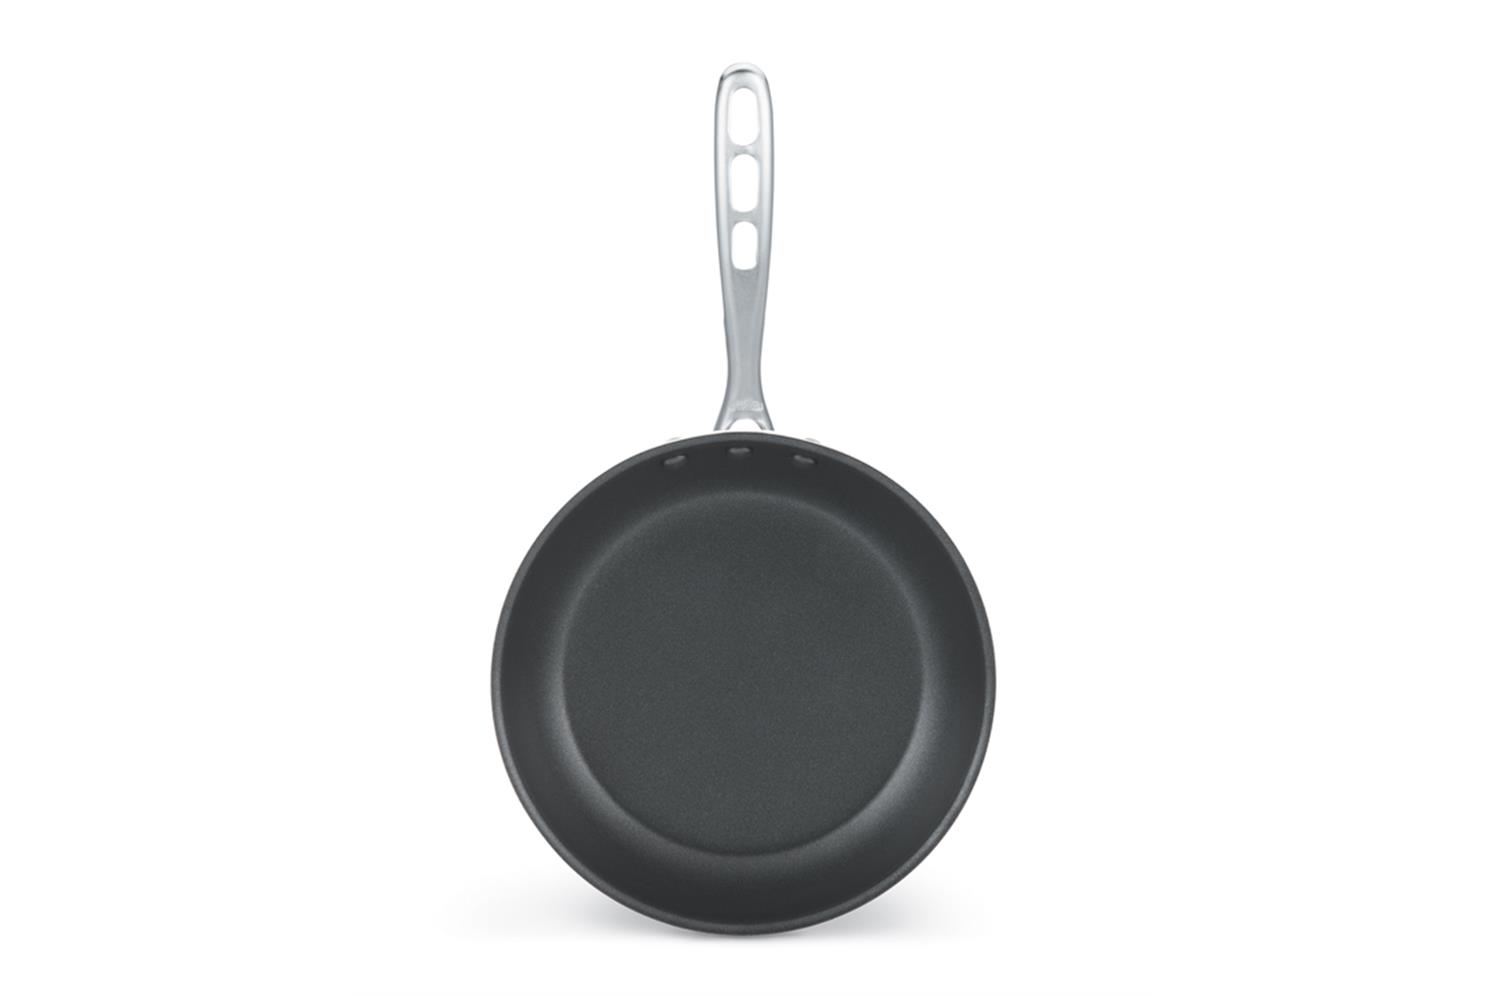 Vollrath 67948 Wear-Ever Fry Pans with CeramiGuard II Interior with TriVent Handle